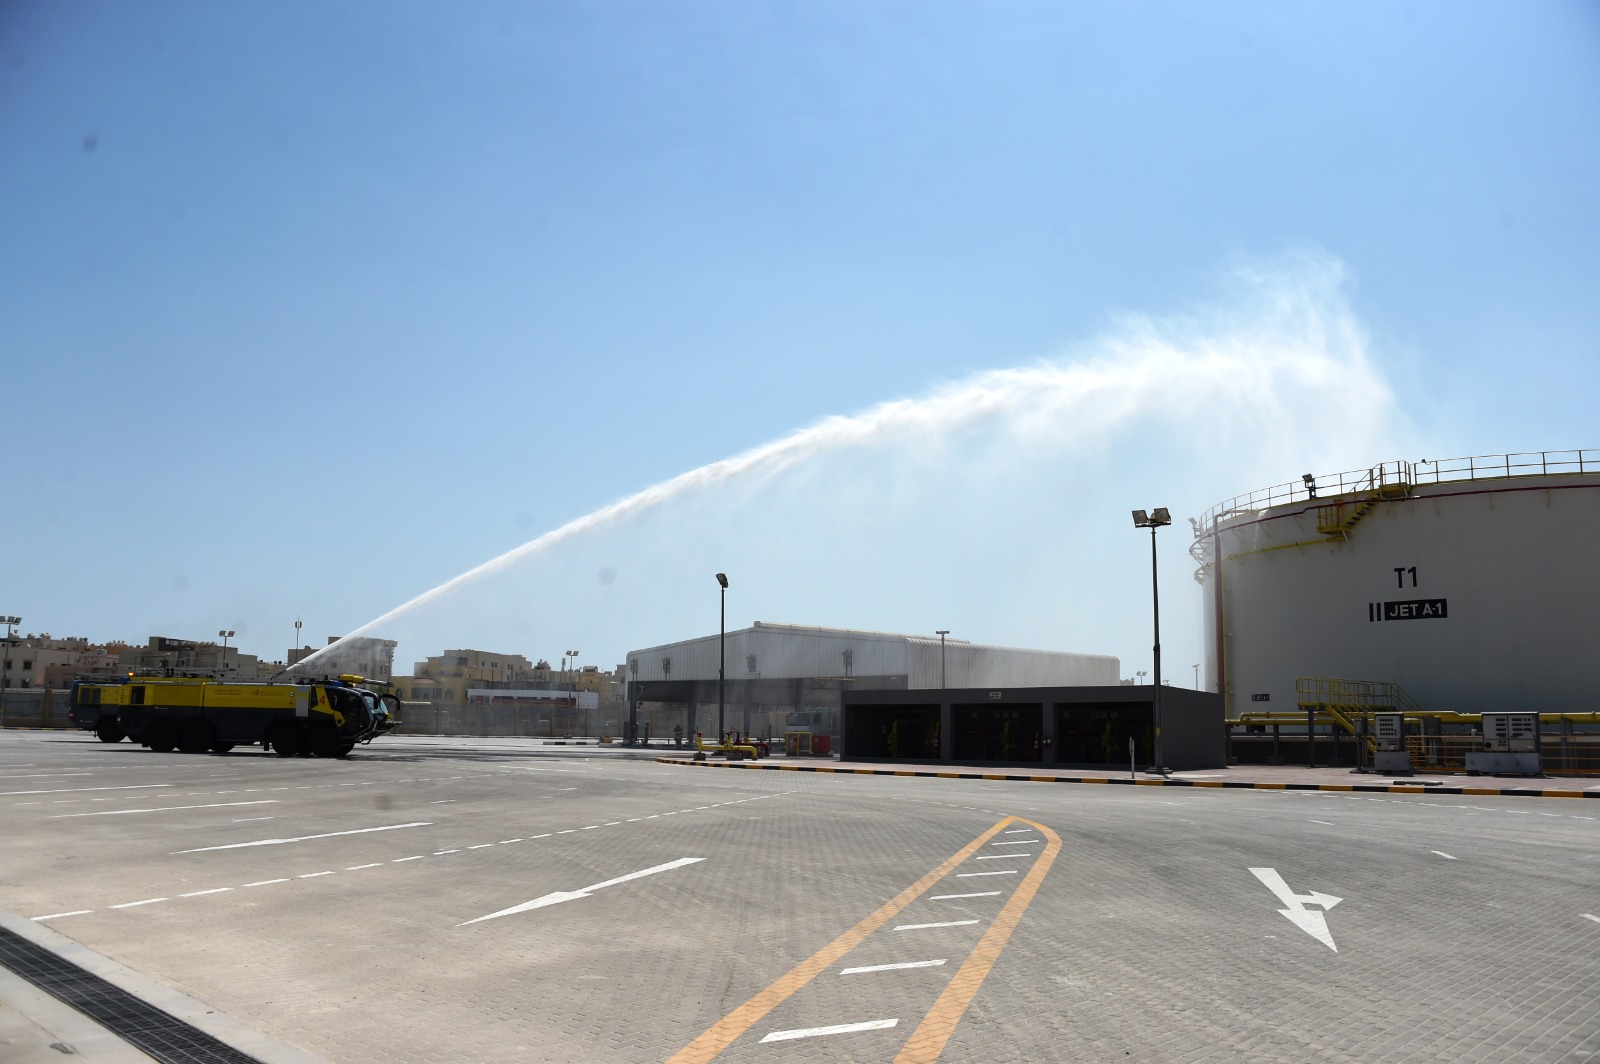 Emergency training exercise completed at Bahrain International Airport’s Fuel Farm complex